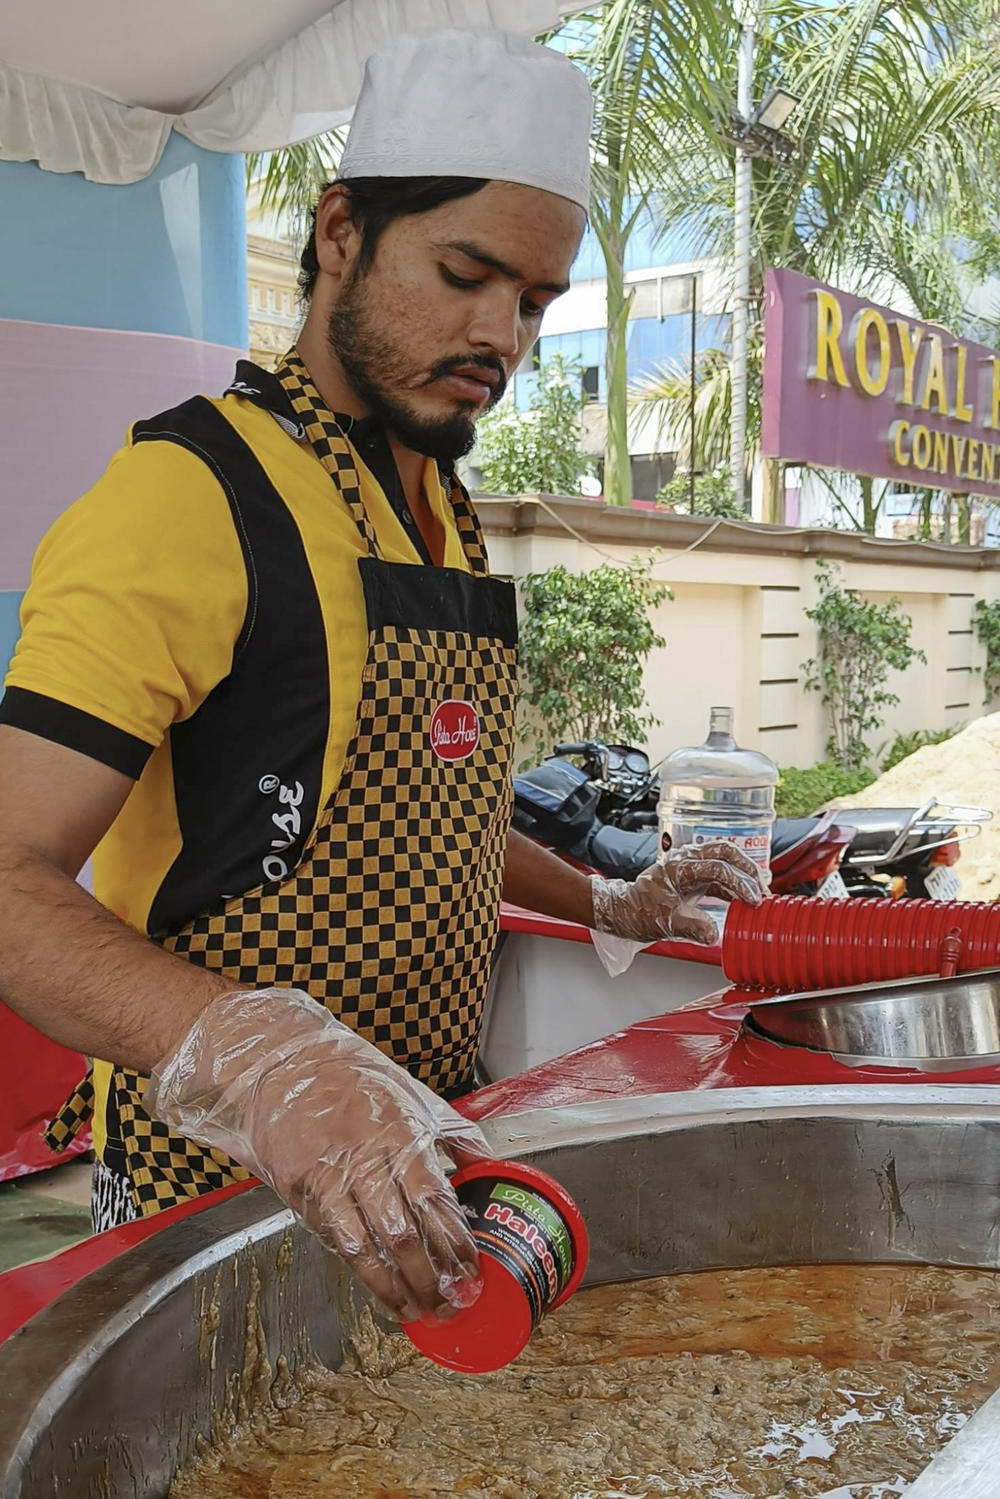 A few hours before the Ramadan fast is broken, a fresh batch of haleem is ready to be served. A worker fills takeout containers with piping hot haleem topped with clarified butter and fried onions.